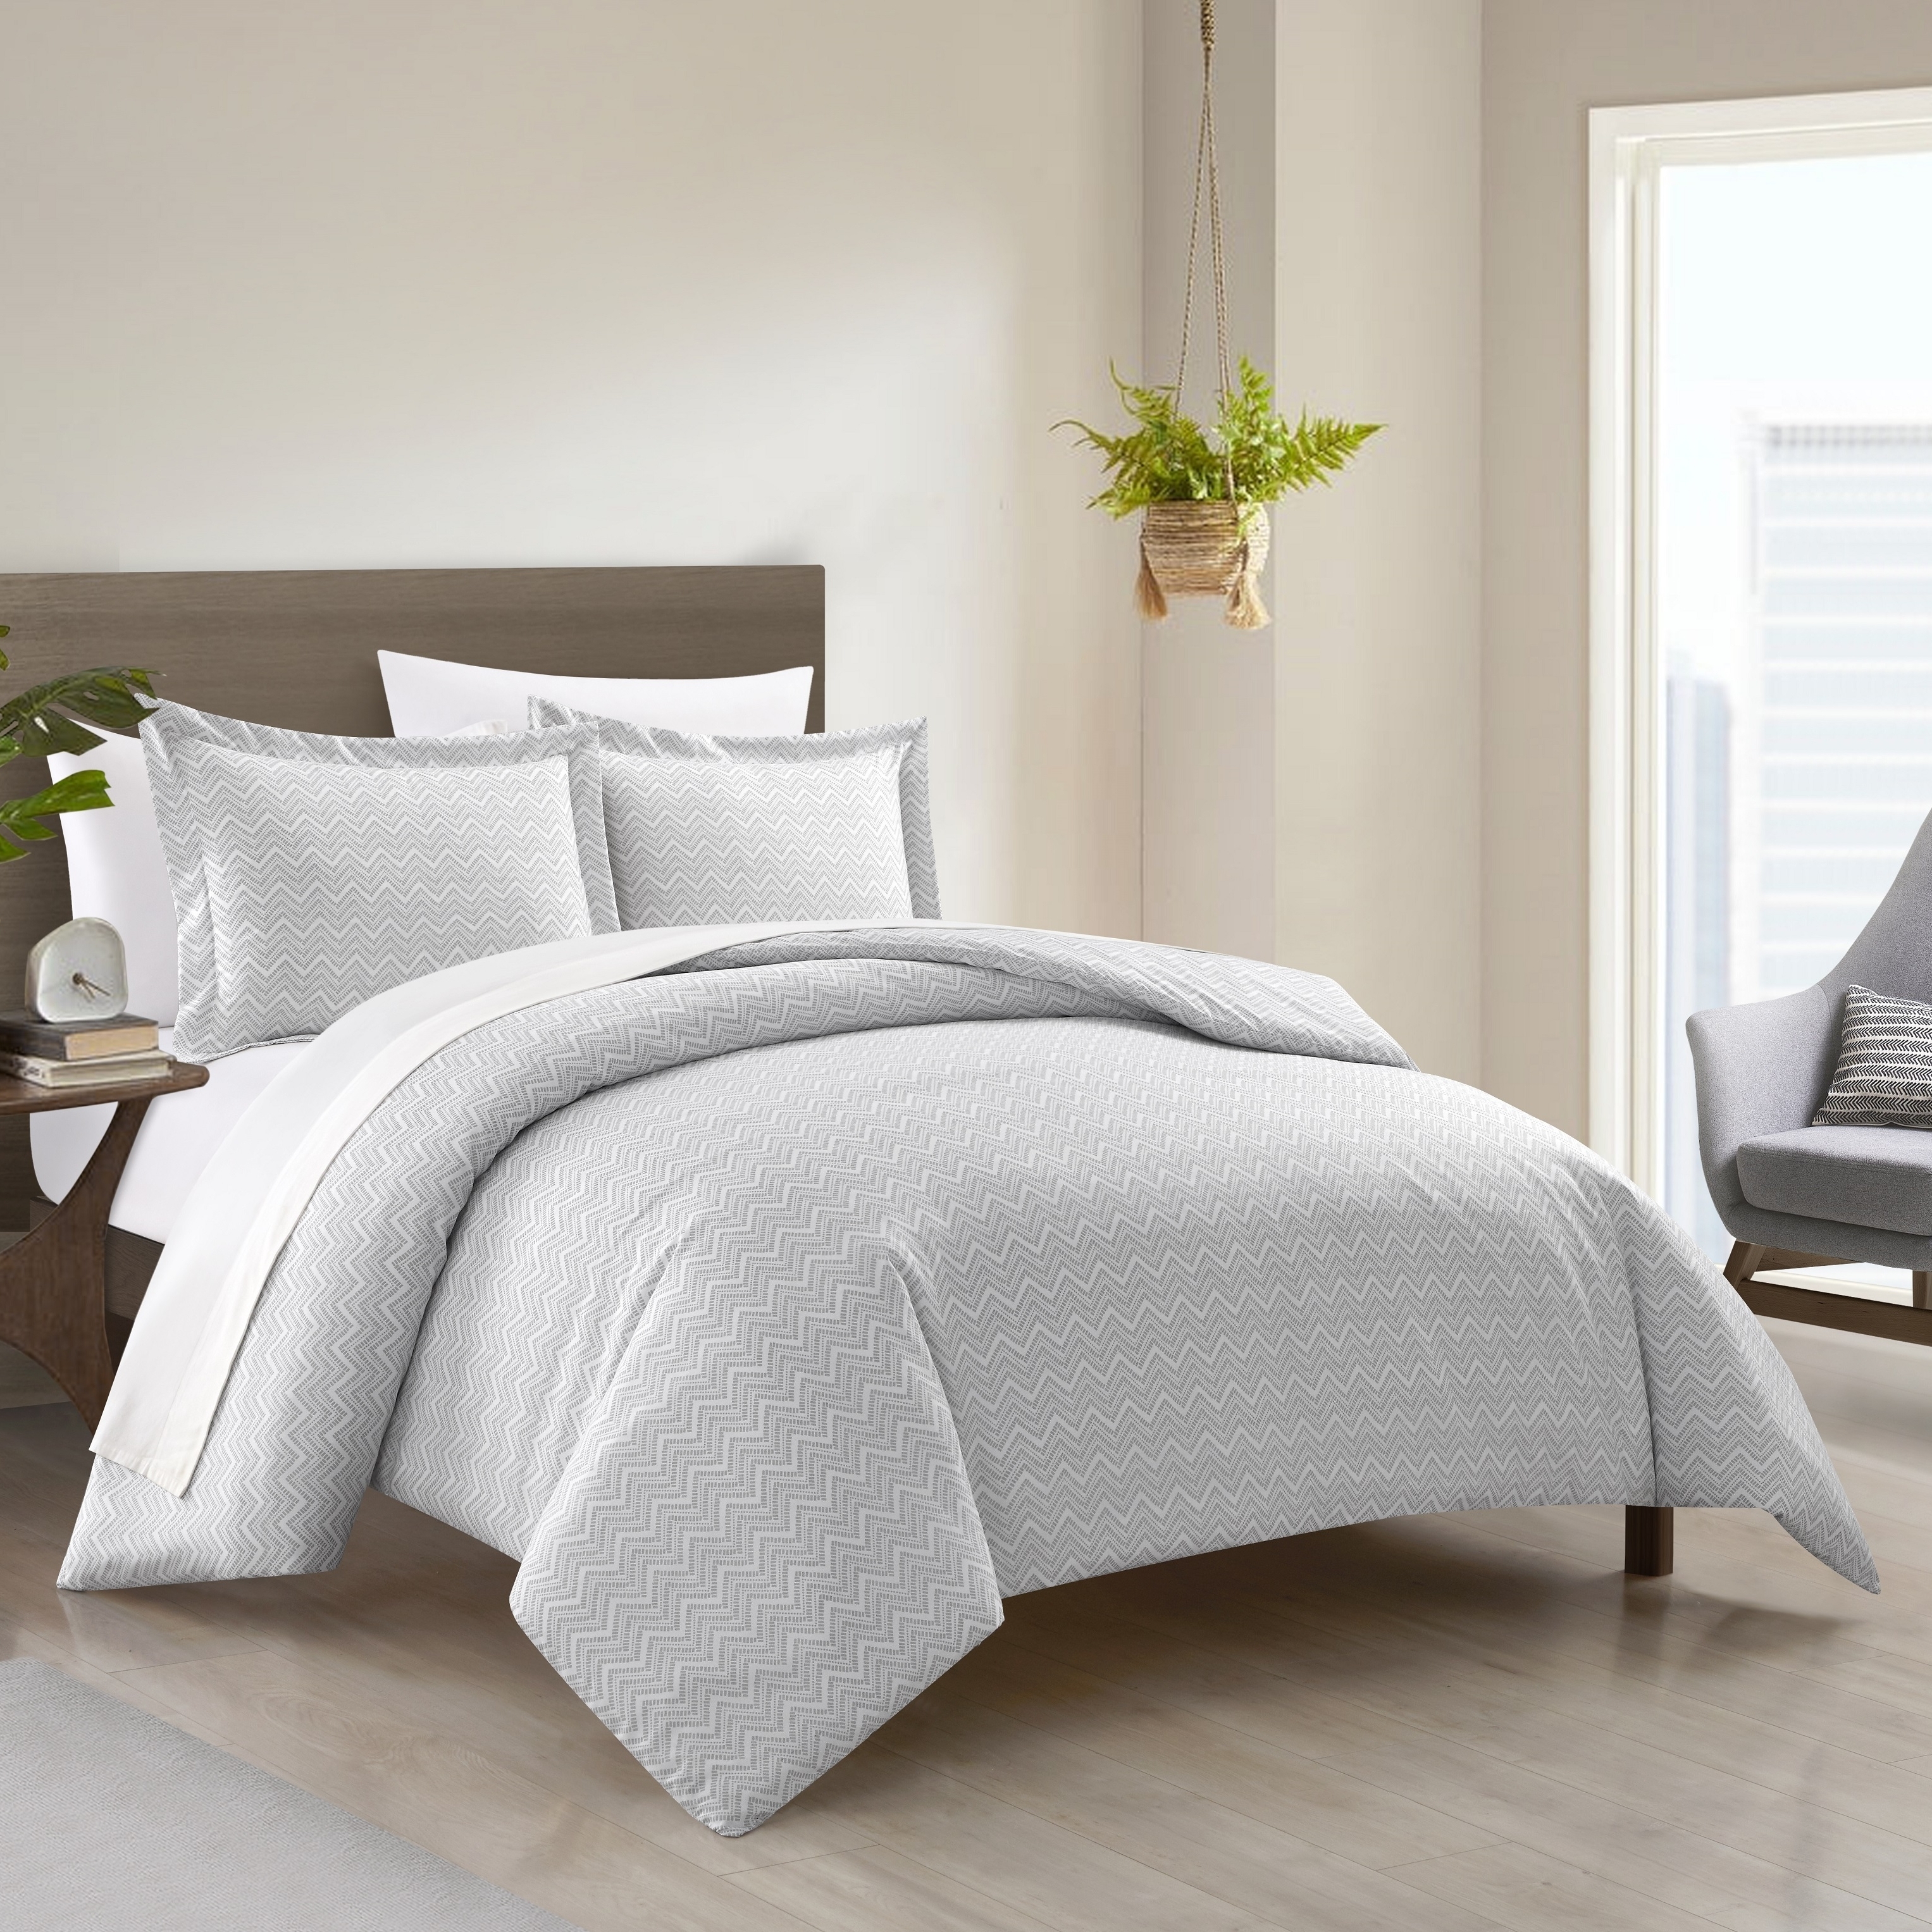 Blaine 2 Or 3 Piece Duvet Cover Set Contemporary Two Tone Striped - Grey, King